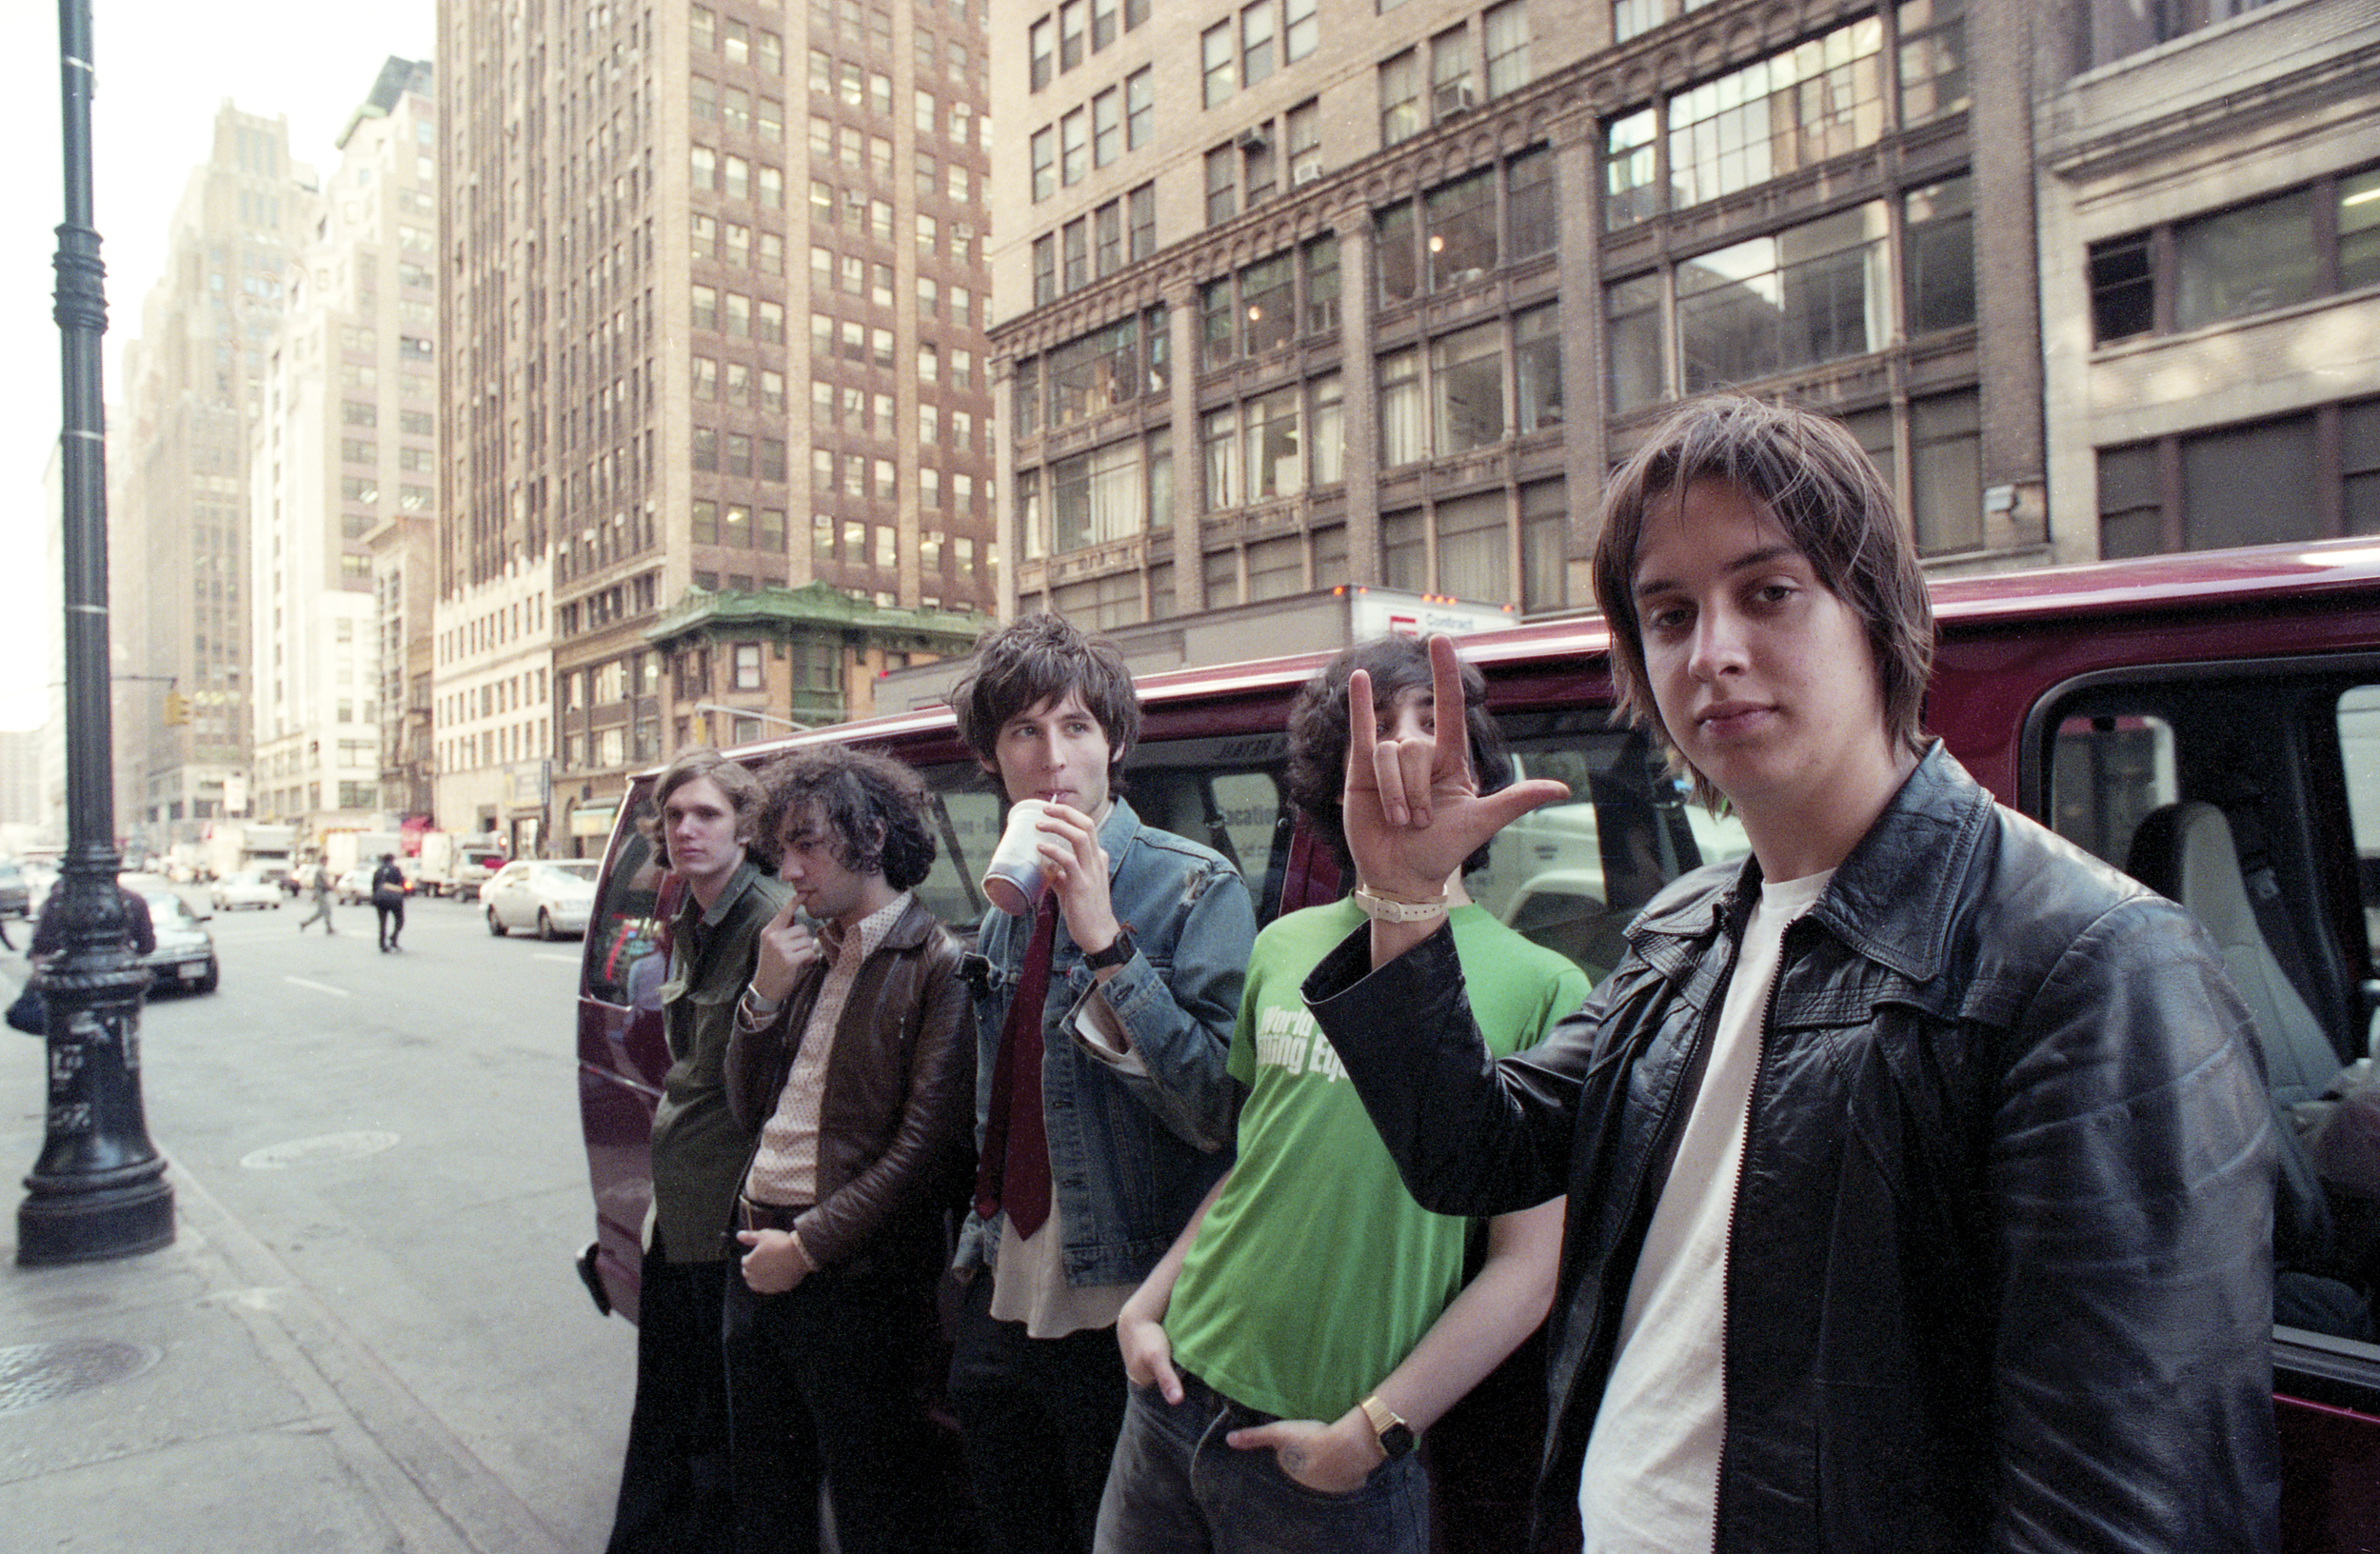 Preview <i></noscript>The Strokes: The First Ten Years</i>, a New Photo Collection of Their Early Days” title=”1922-copy-1504101159″ data-original-id=”255977″ data-adjusted-id=”255977″ class=”sm_size_full_width sm_alignment_center ” data-image-source=”getty” />
<img src=